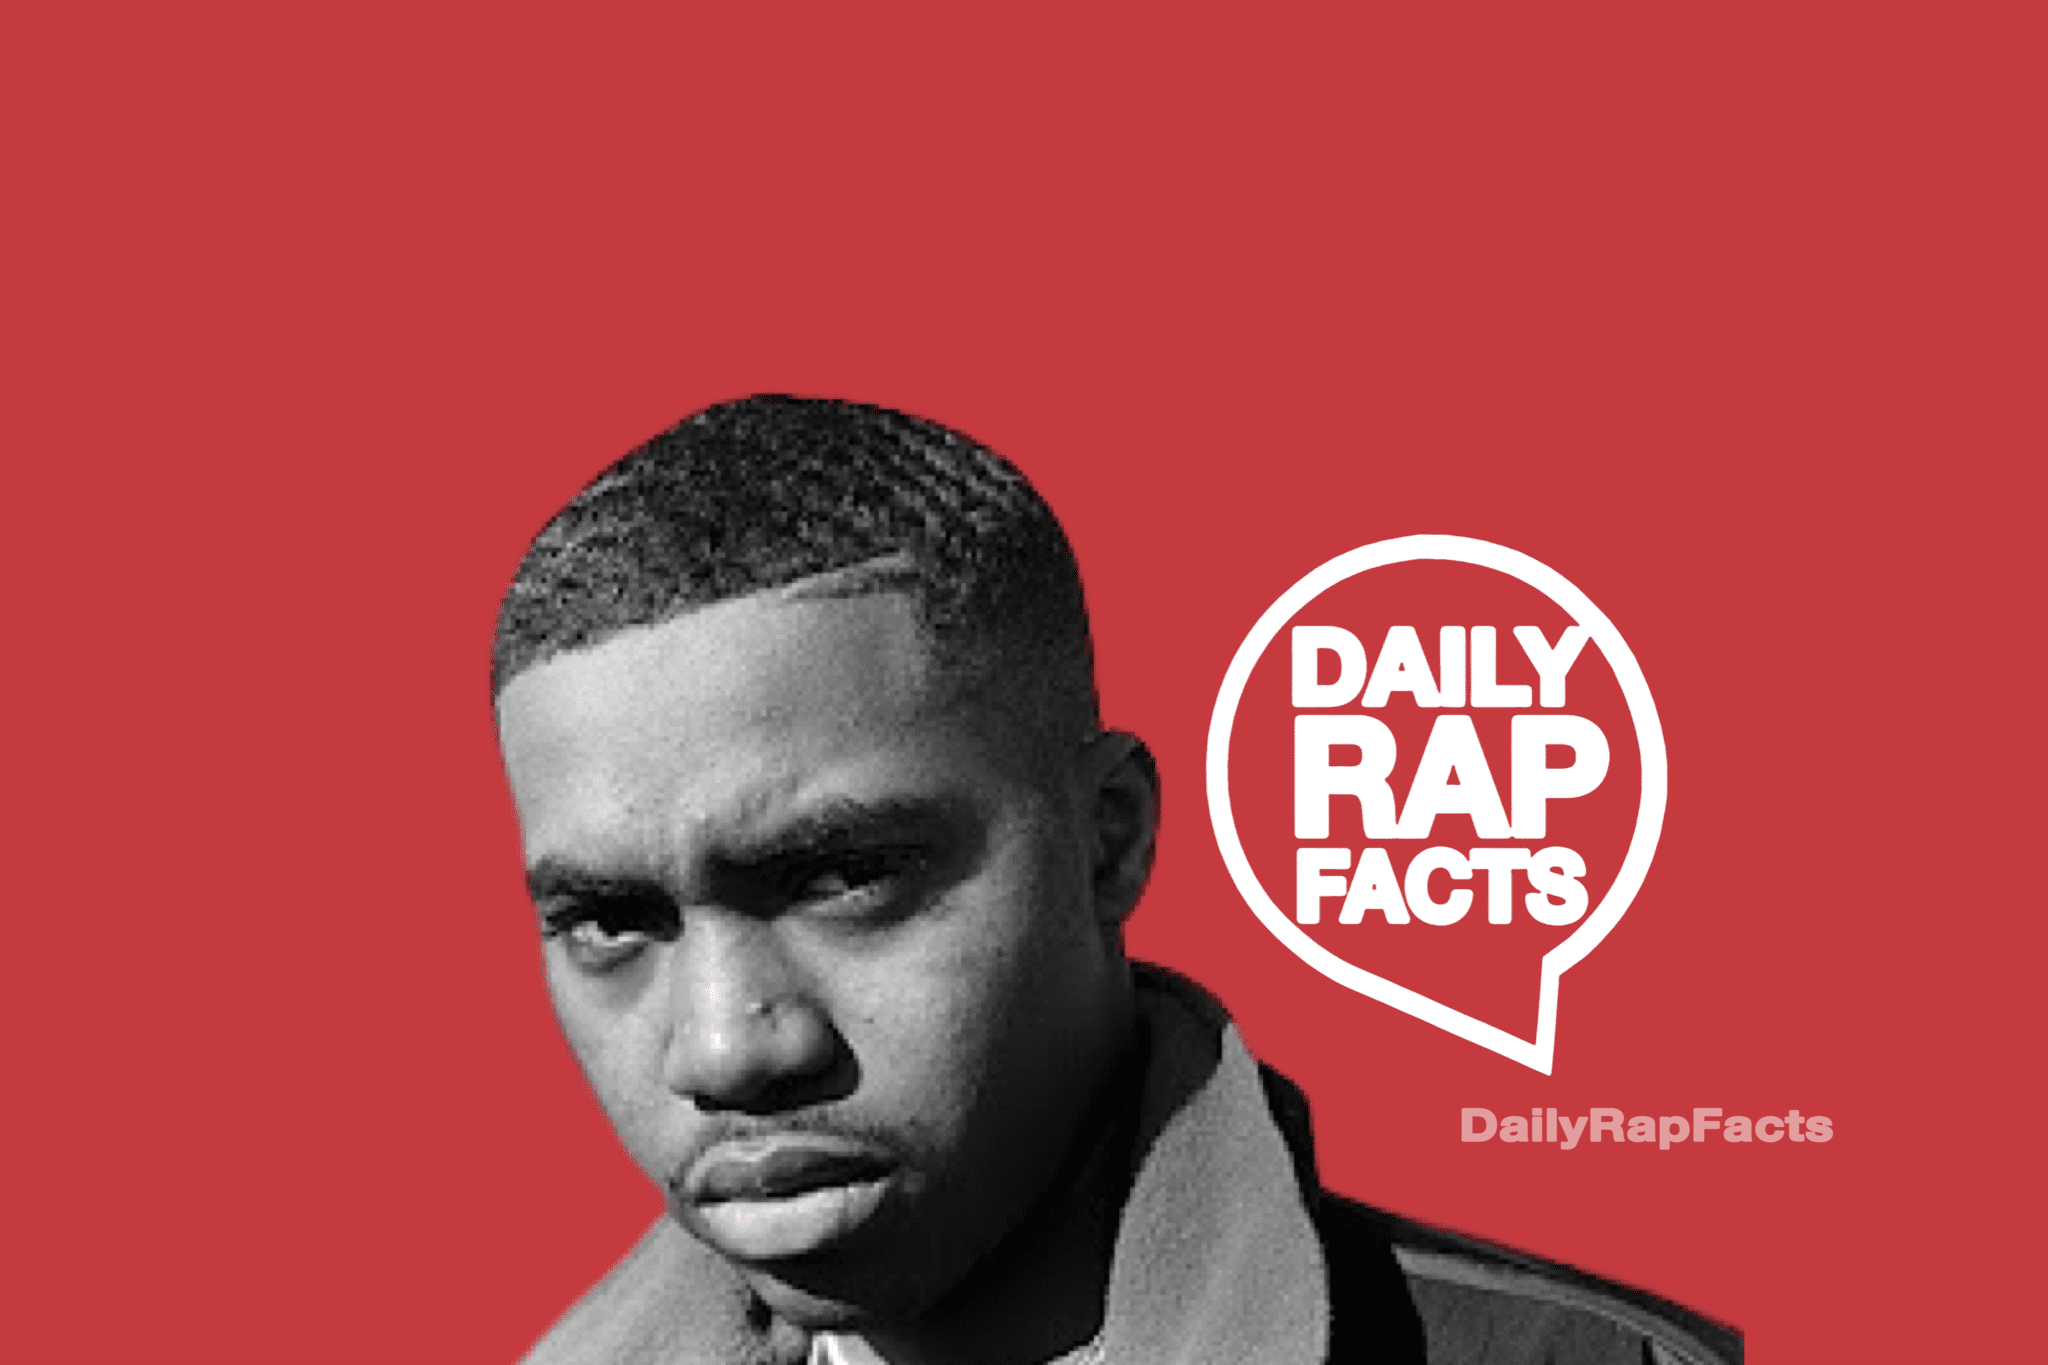 Nas’ first rap name was Kid Wave